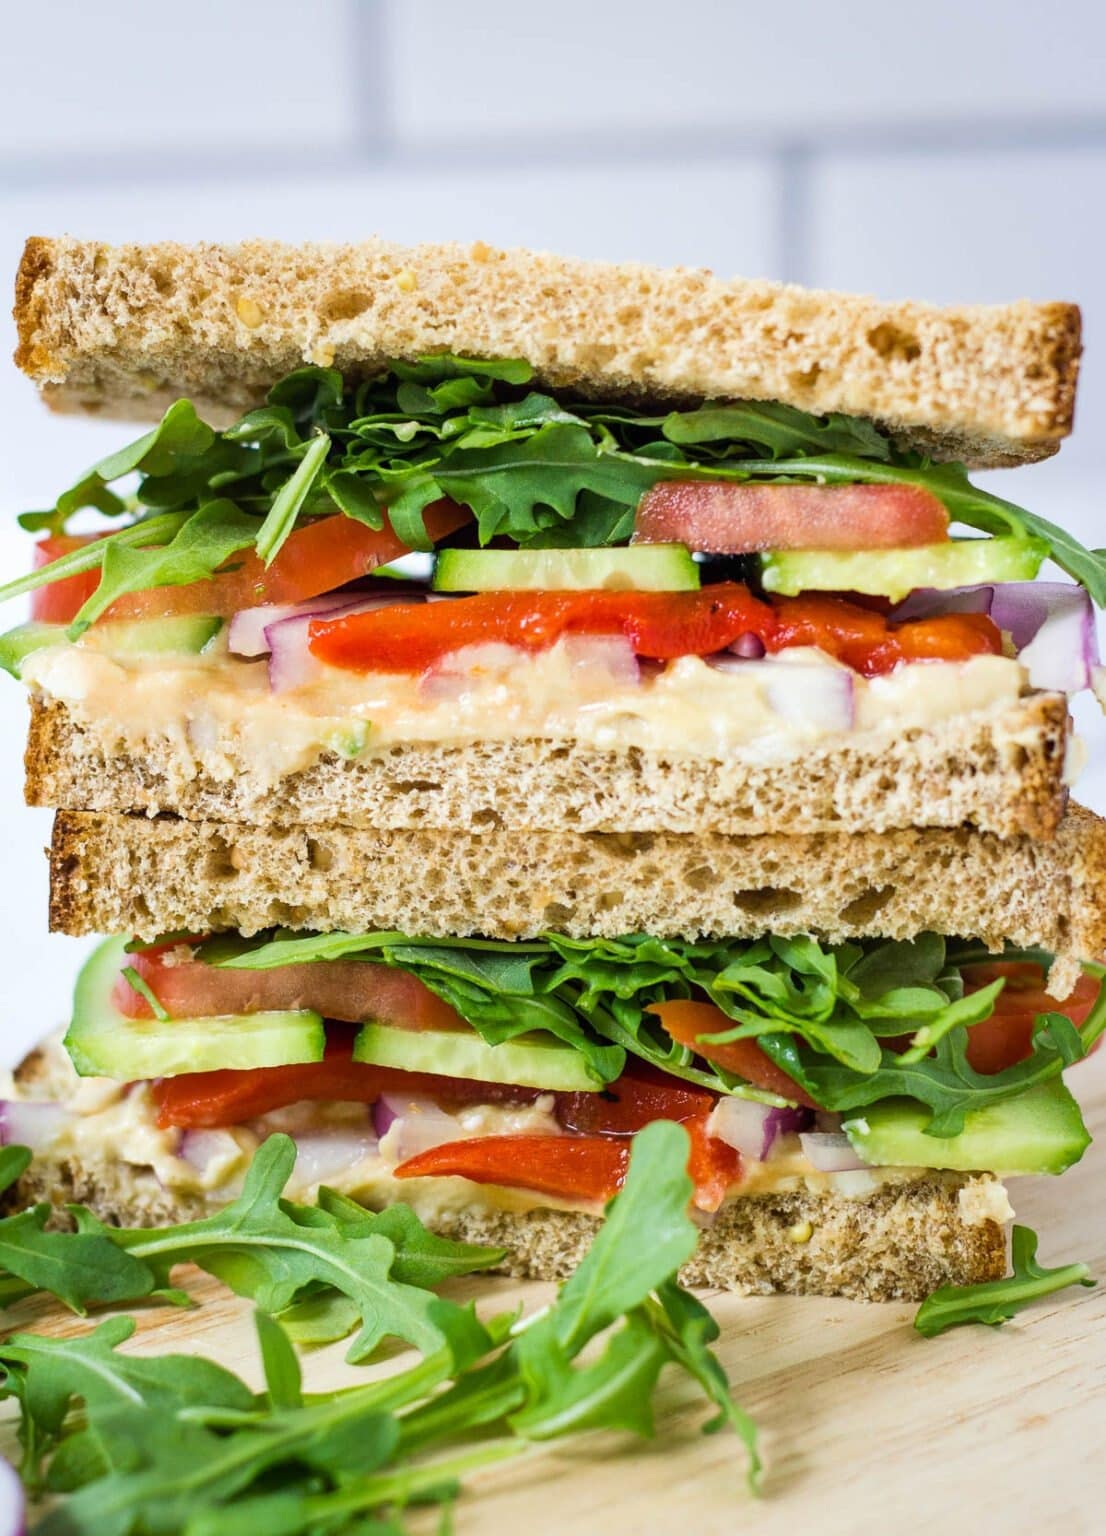 Wheat bread with arugula, hummus and cucumbers filling. 